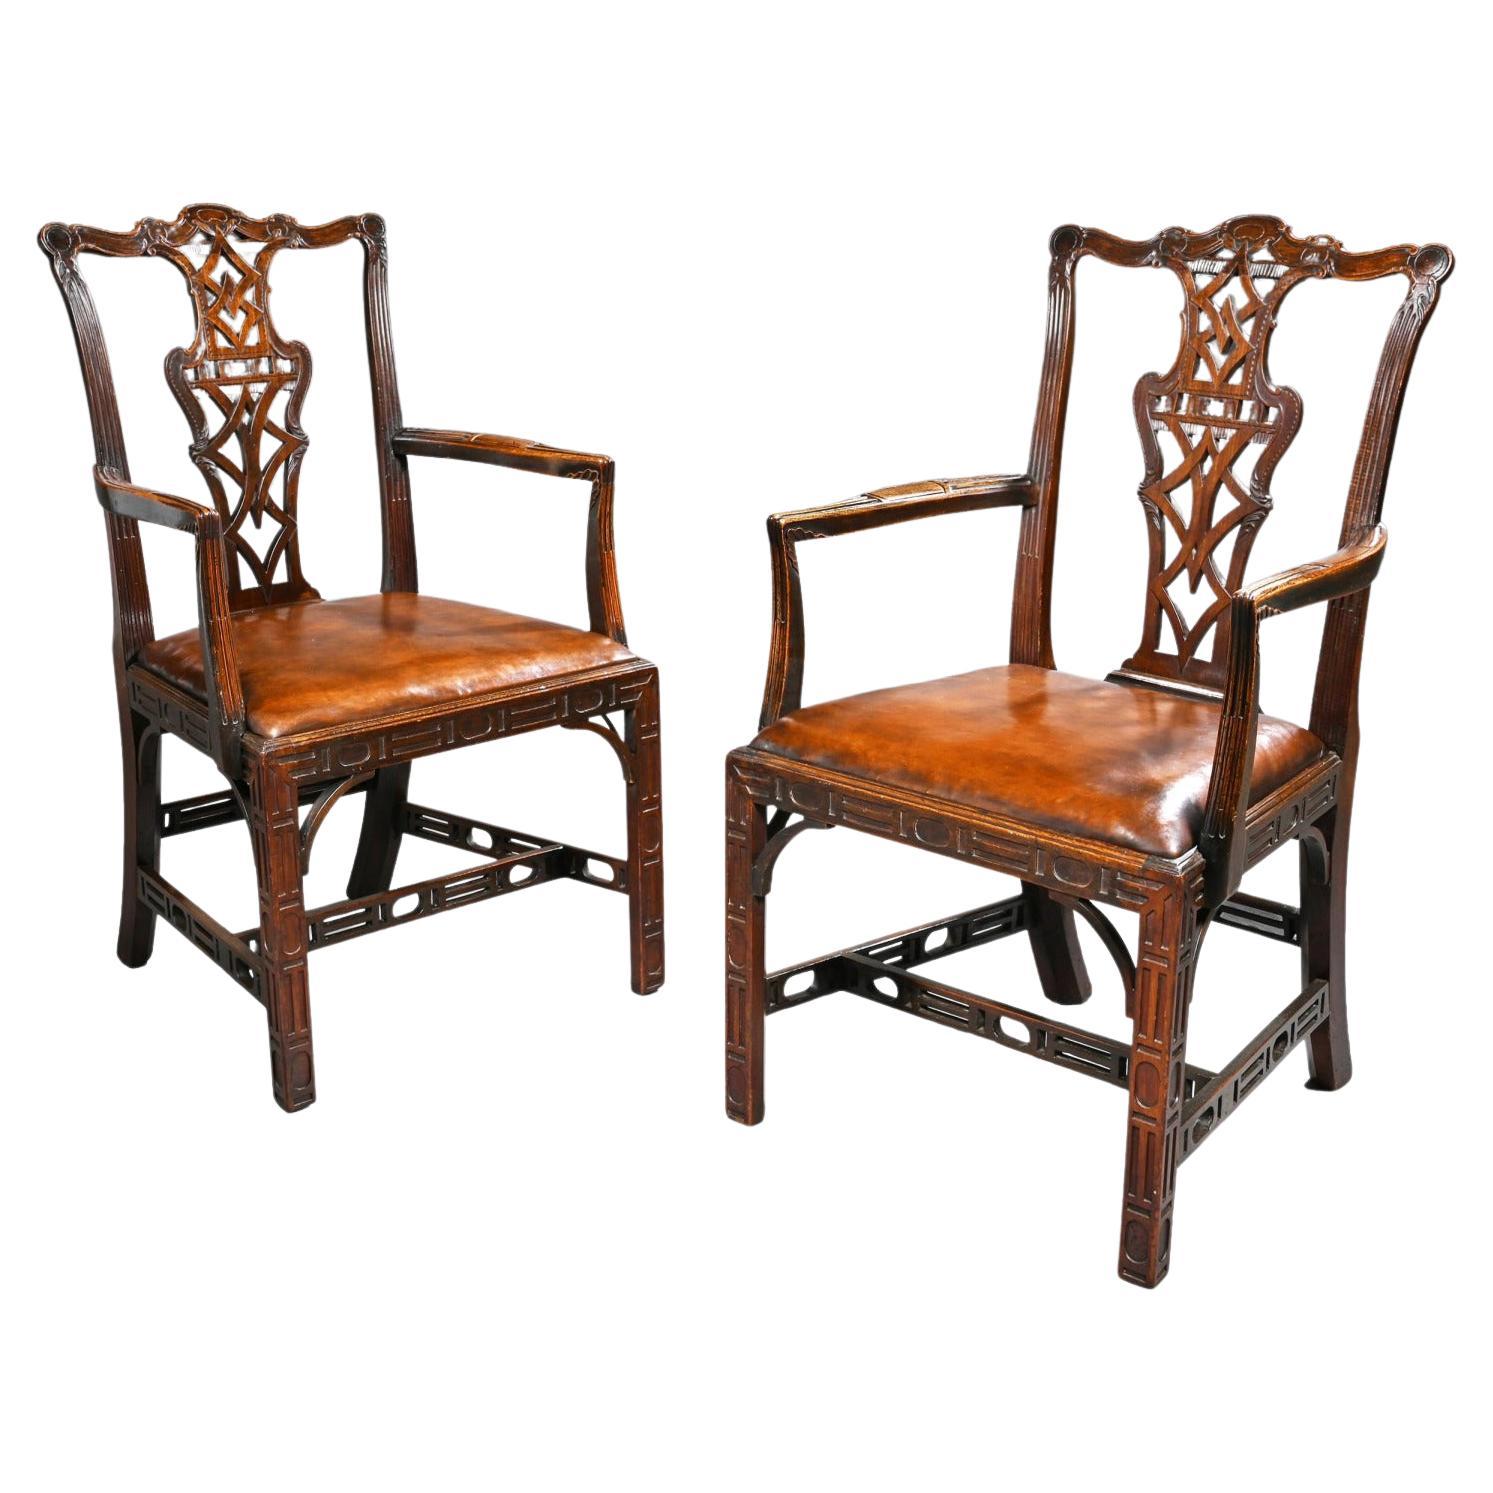 Pair of Chippendale Style Mahogany and Leather Armchairs